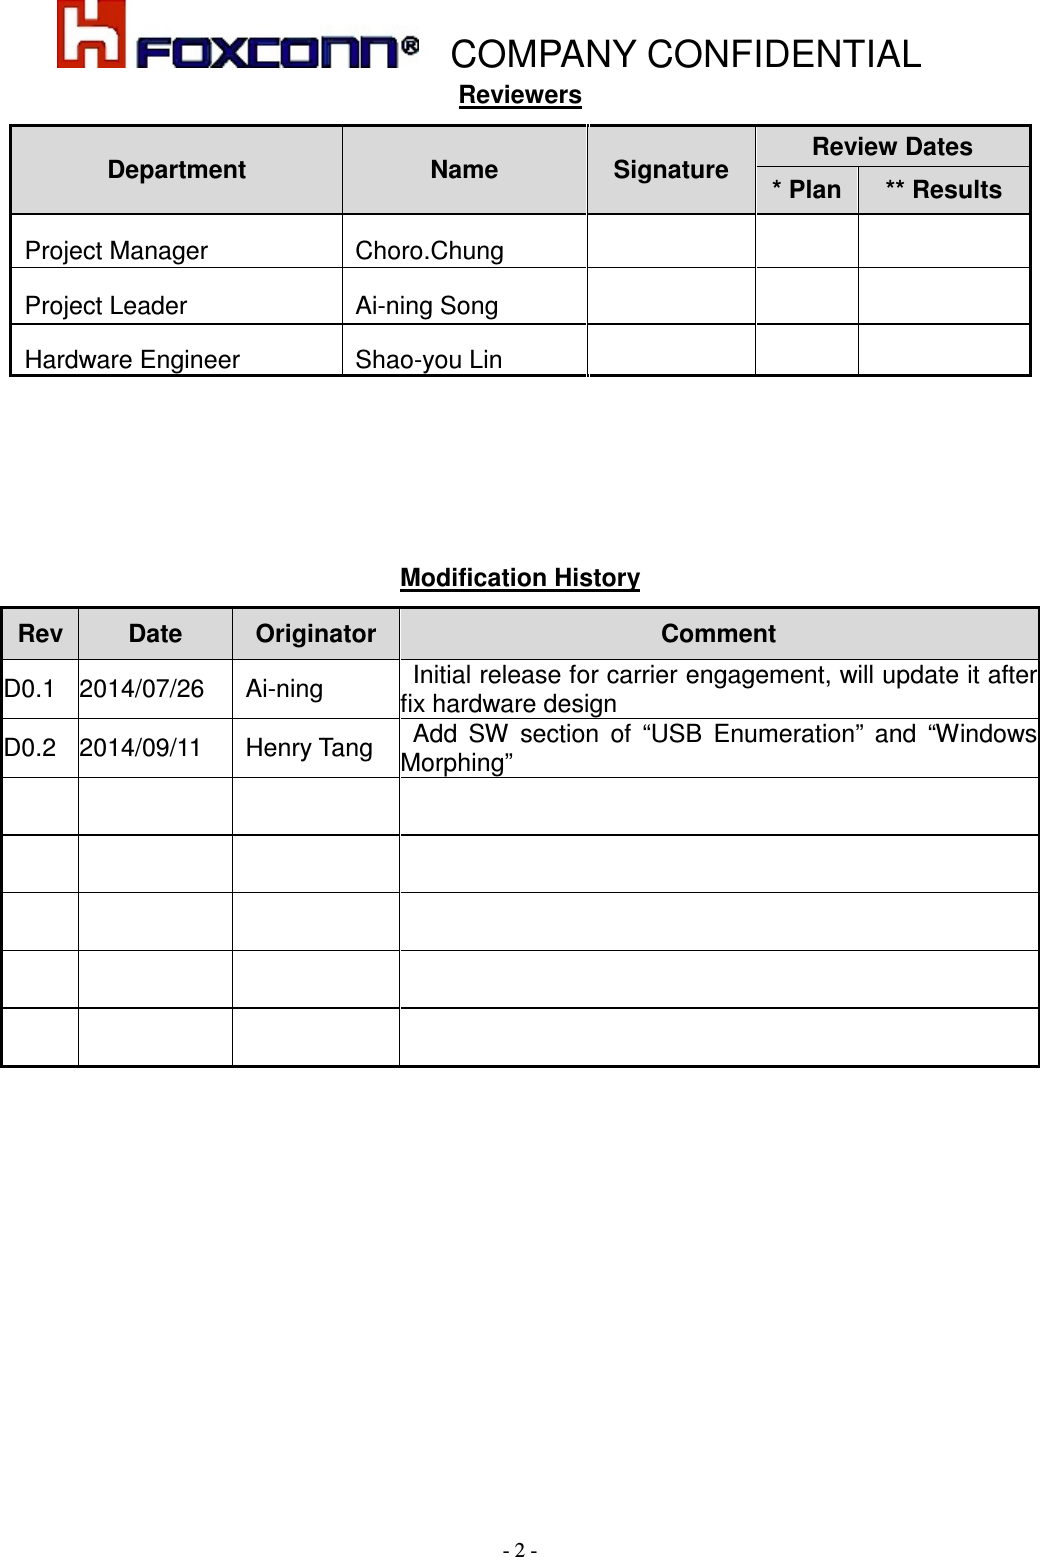    COMPANY CONFIDENTIAL - 2 - Reviewers Department Name  Signature  Review Dates * Plan ** Results   Project Manager  Choro.Chung         Project Leader  Ai-ning Song         Hardware Engineer    Shao-you Lin           Modification History Rev Date  Originator  Comment D0.1  2014/07/26  Ai-ning  Initial release for carrier engagement, will update it after fix hardware design D0.2  2014/09/11  Henry Tang Add  SW  section  of  “USB  Enumeration”  and  “Windows Morphing”                                     